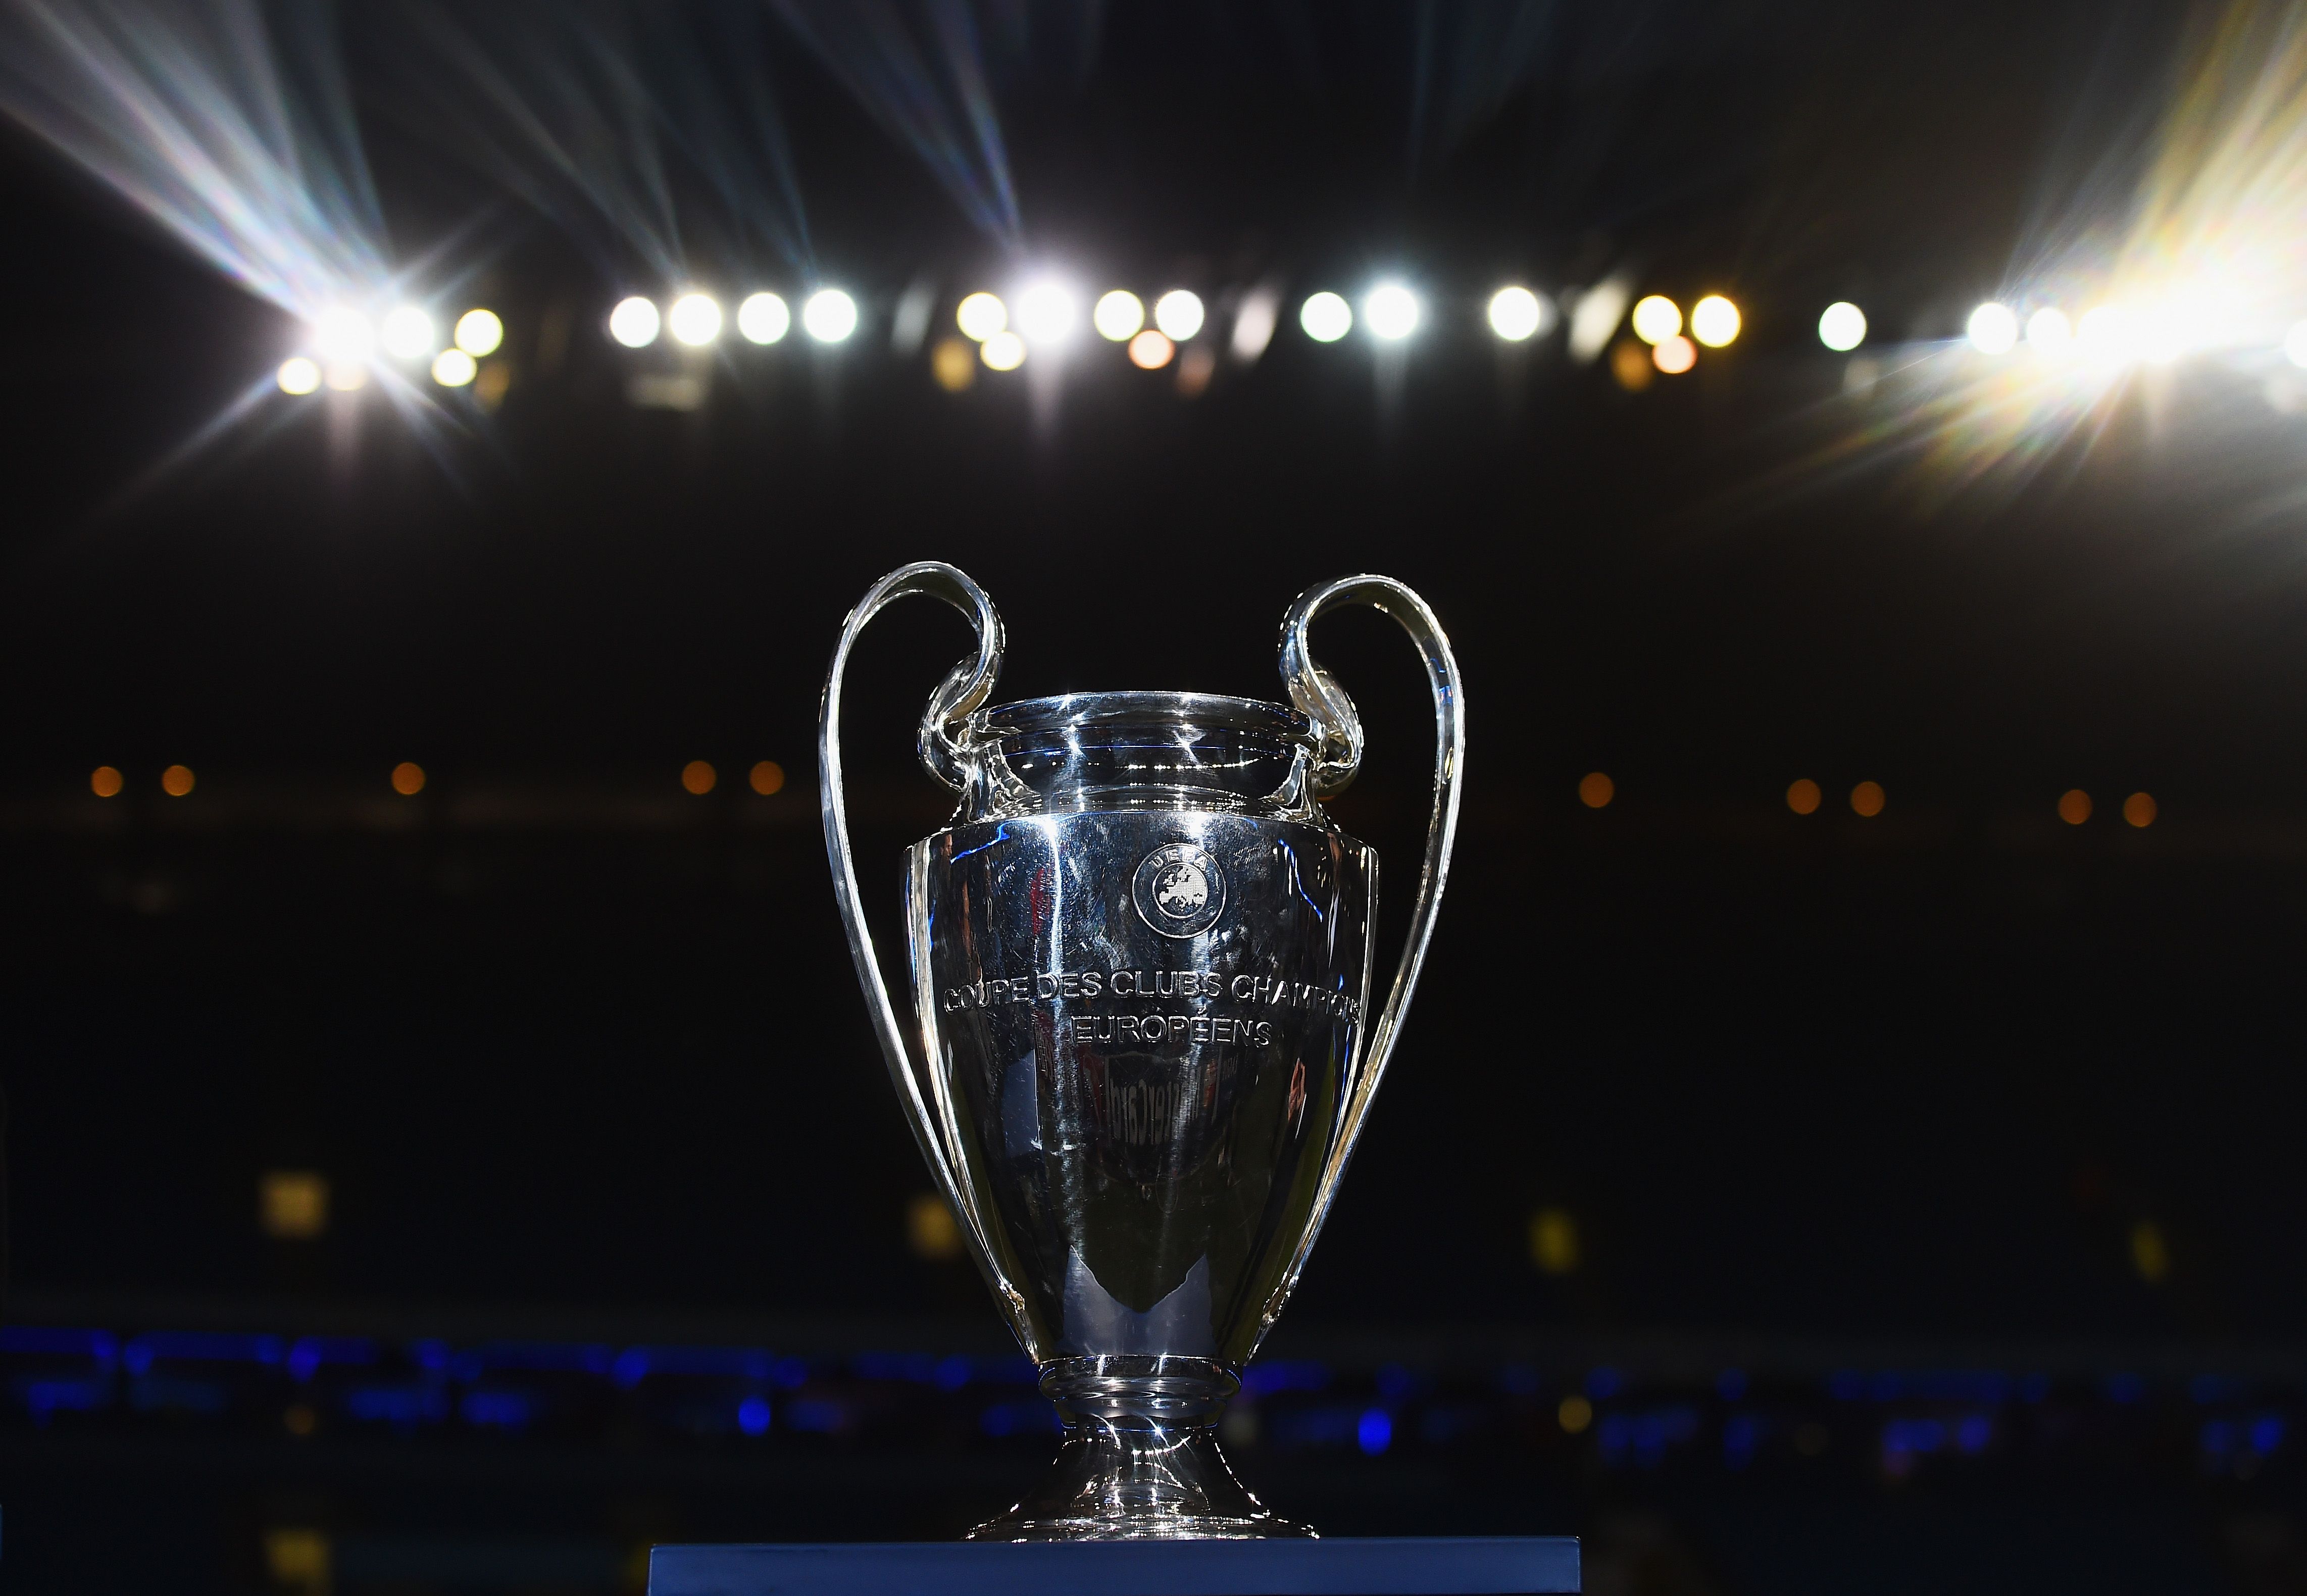 The Champions League trophy prior to a game